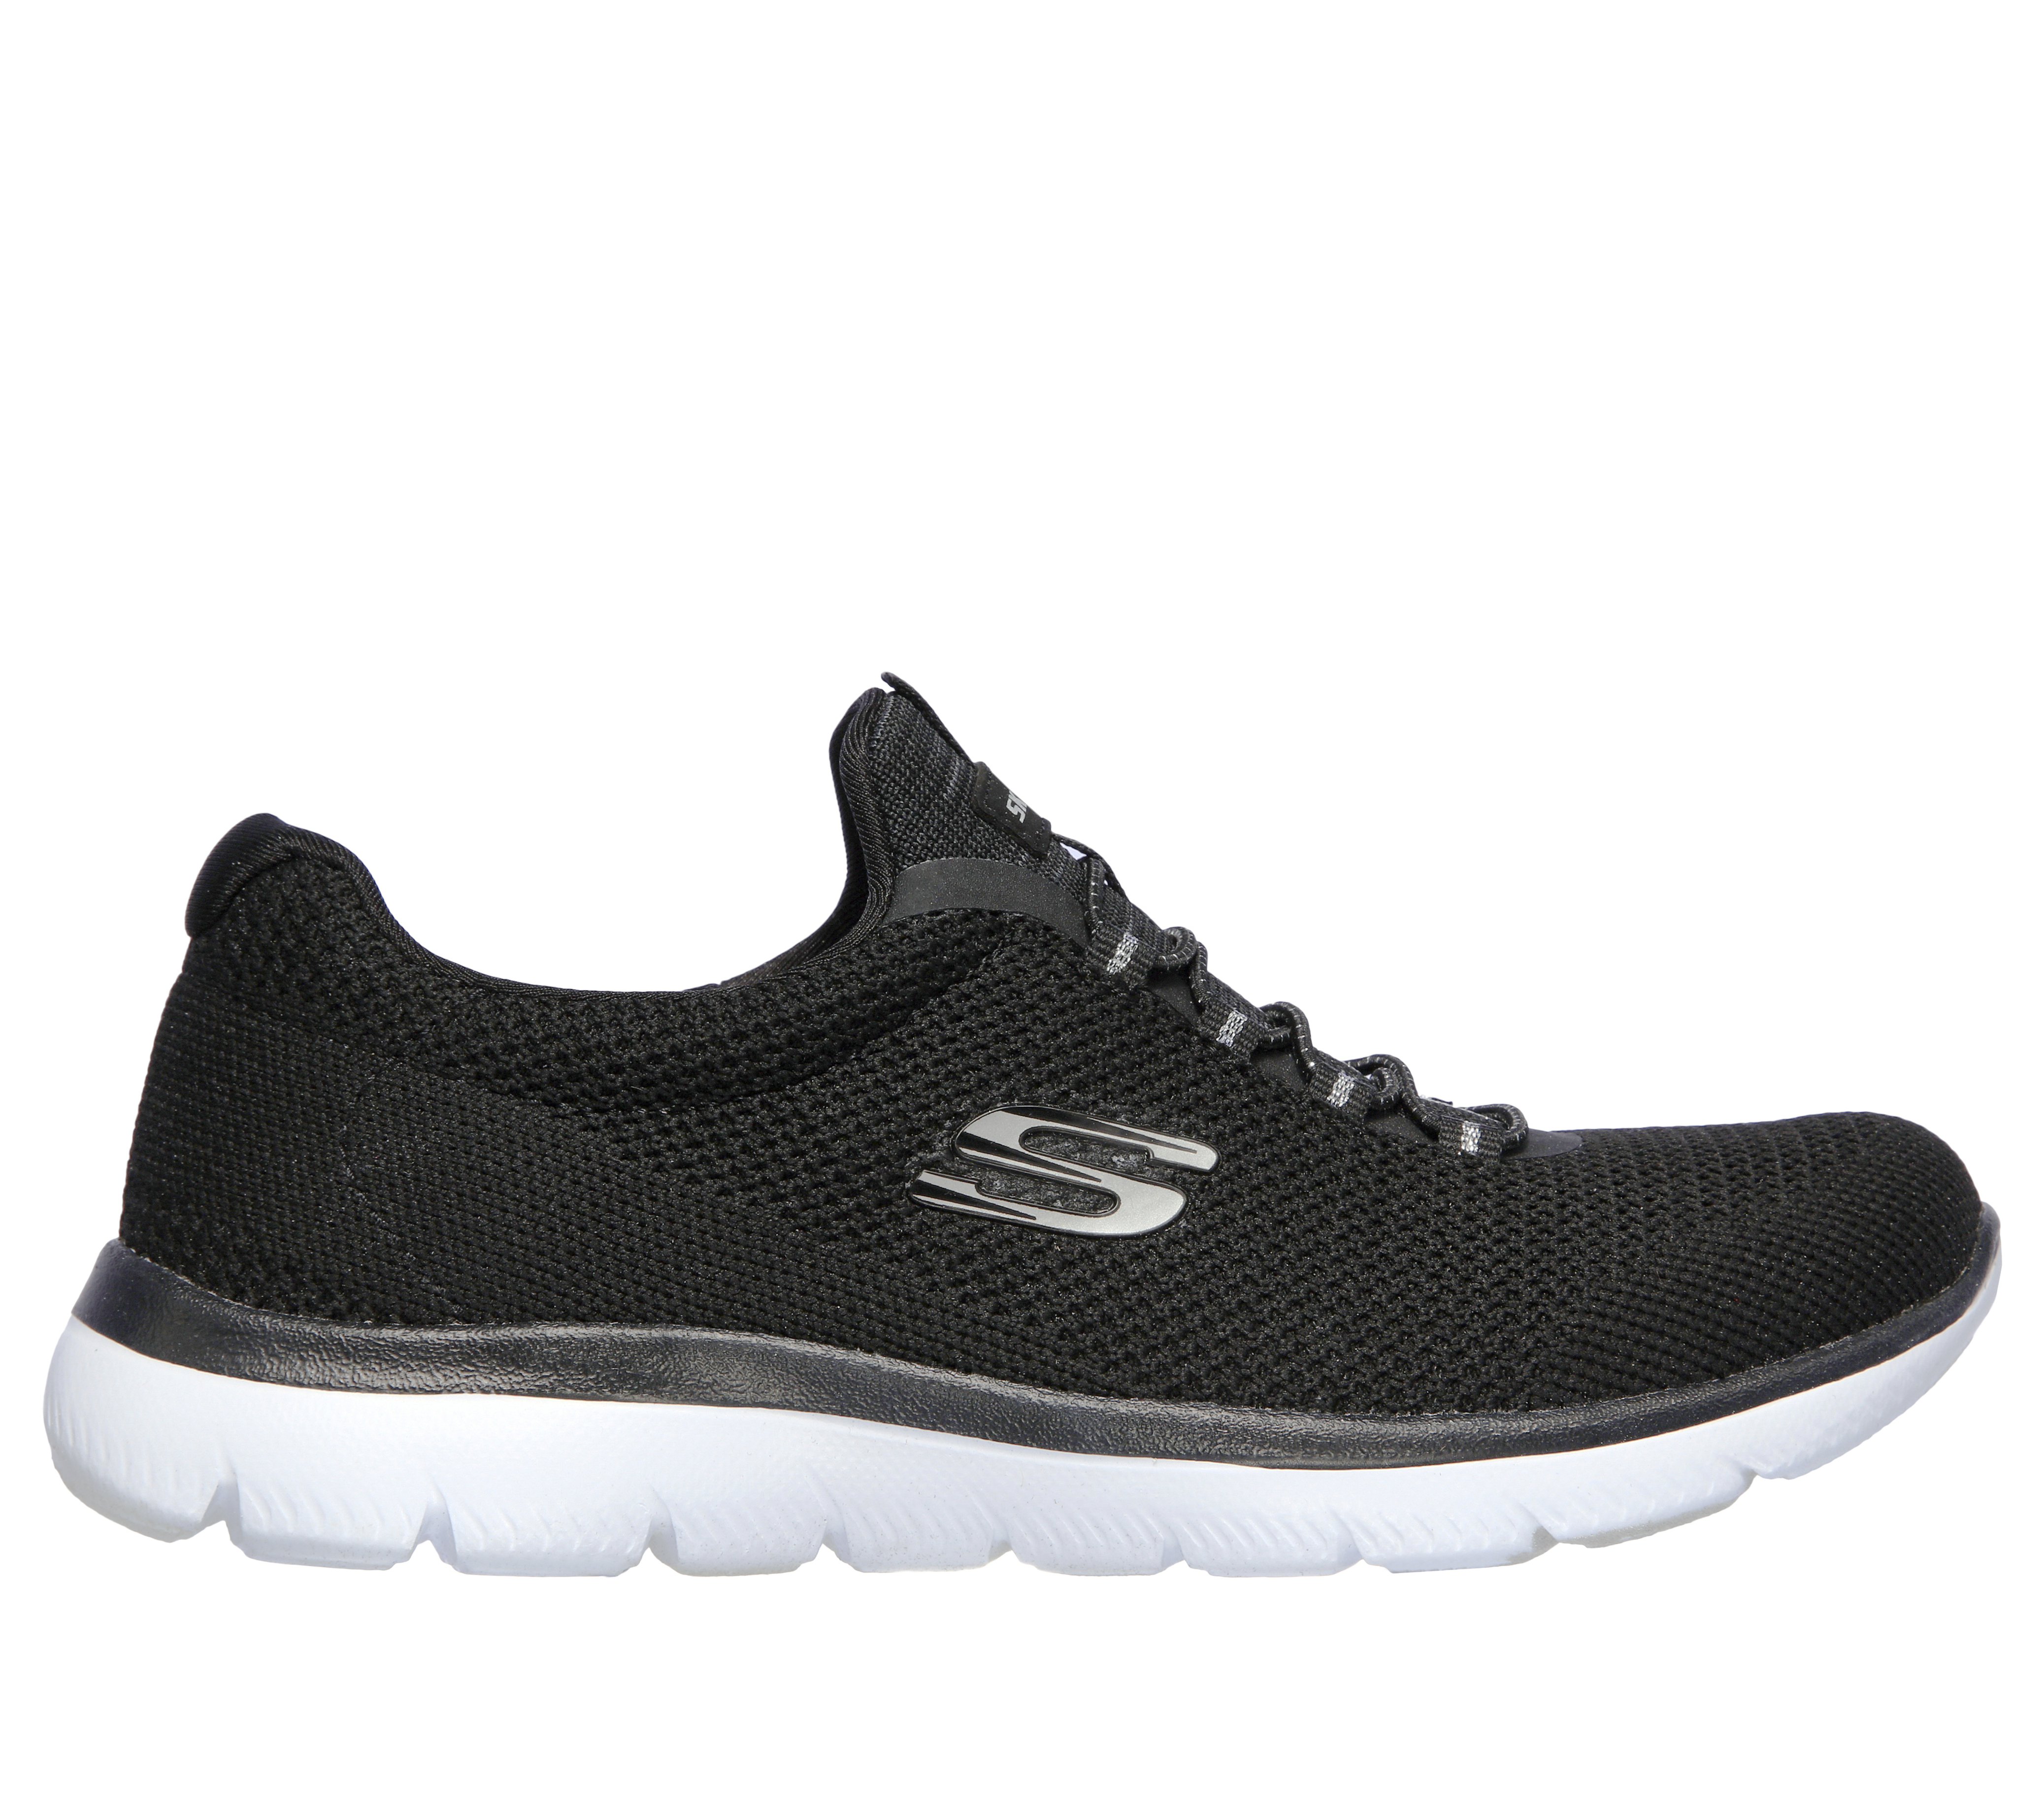 skechers classic shoes